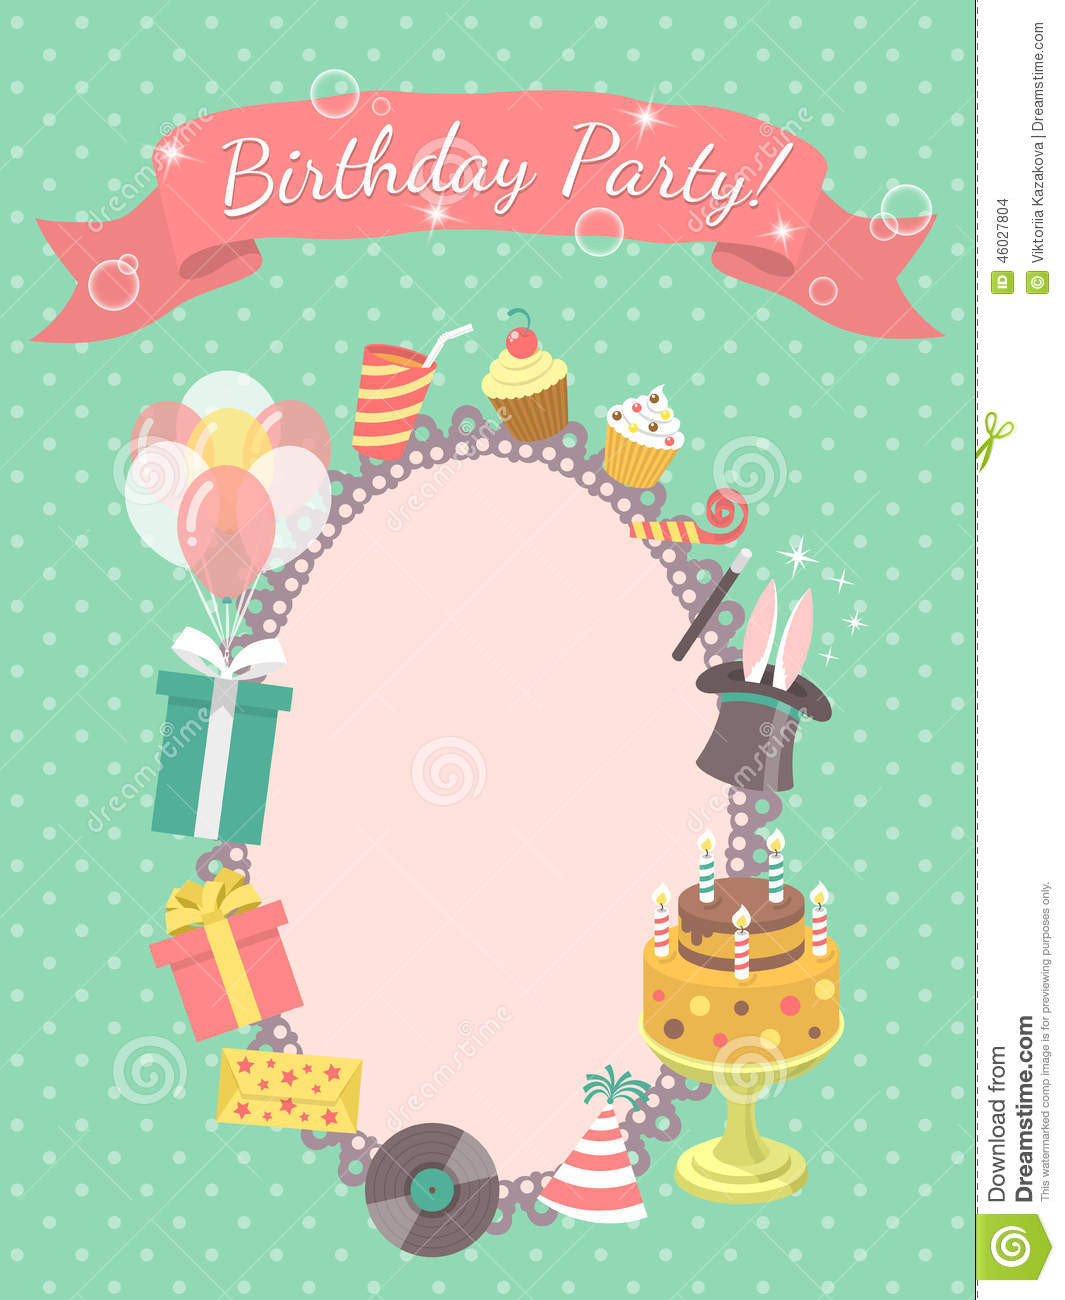 Invitation Cards For Birthday Party
 Birthday Party Invitation Card Stock Vector Image